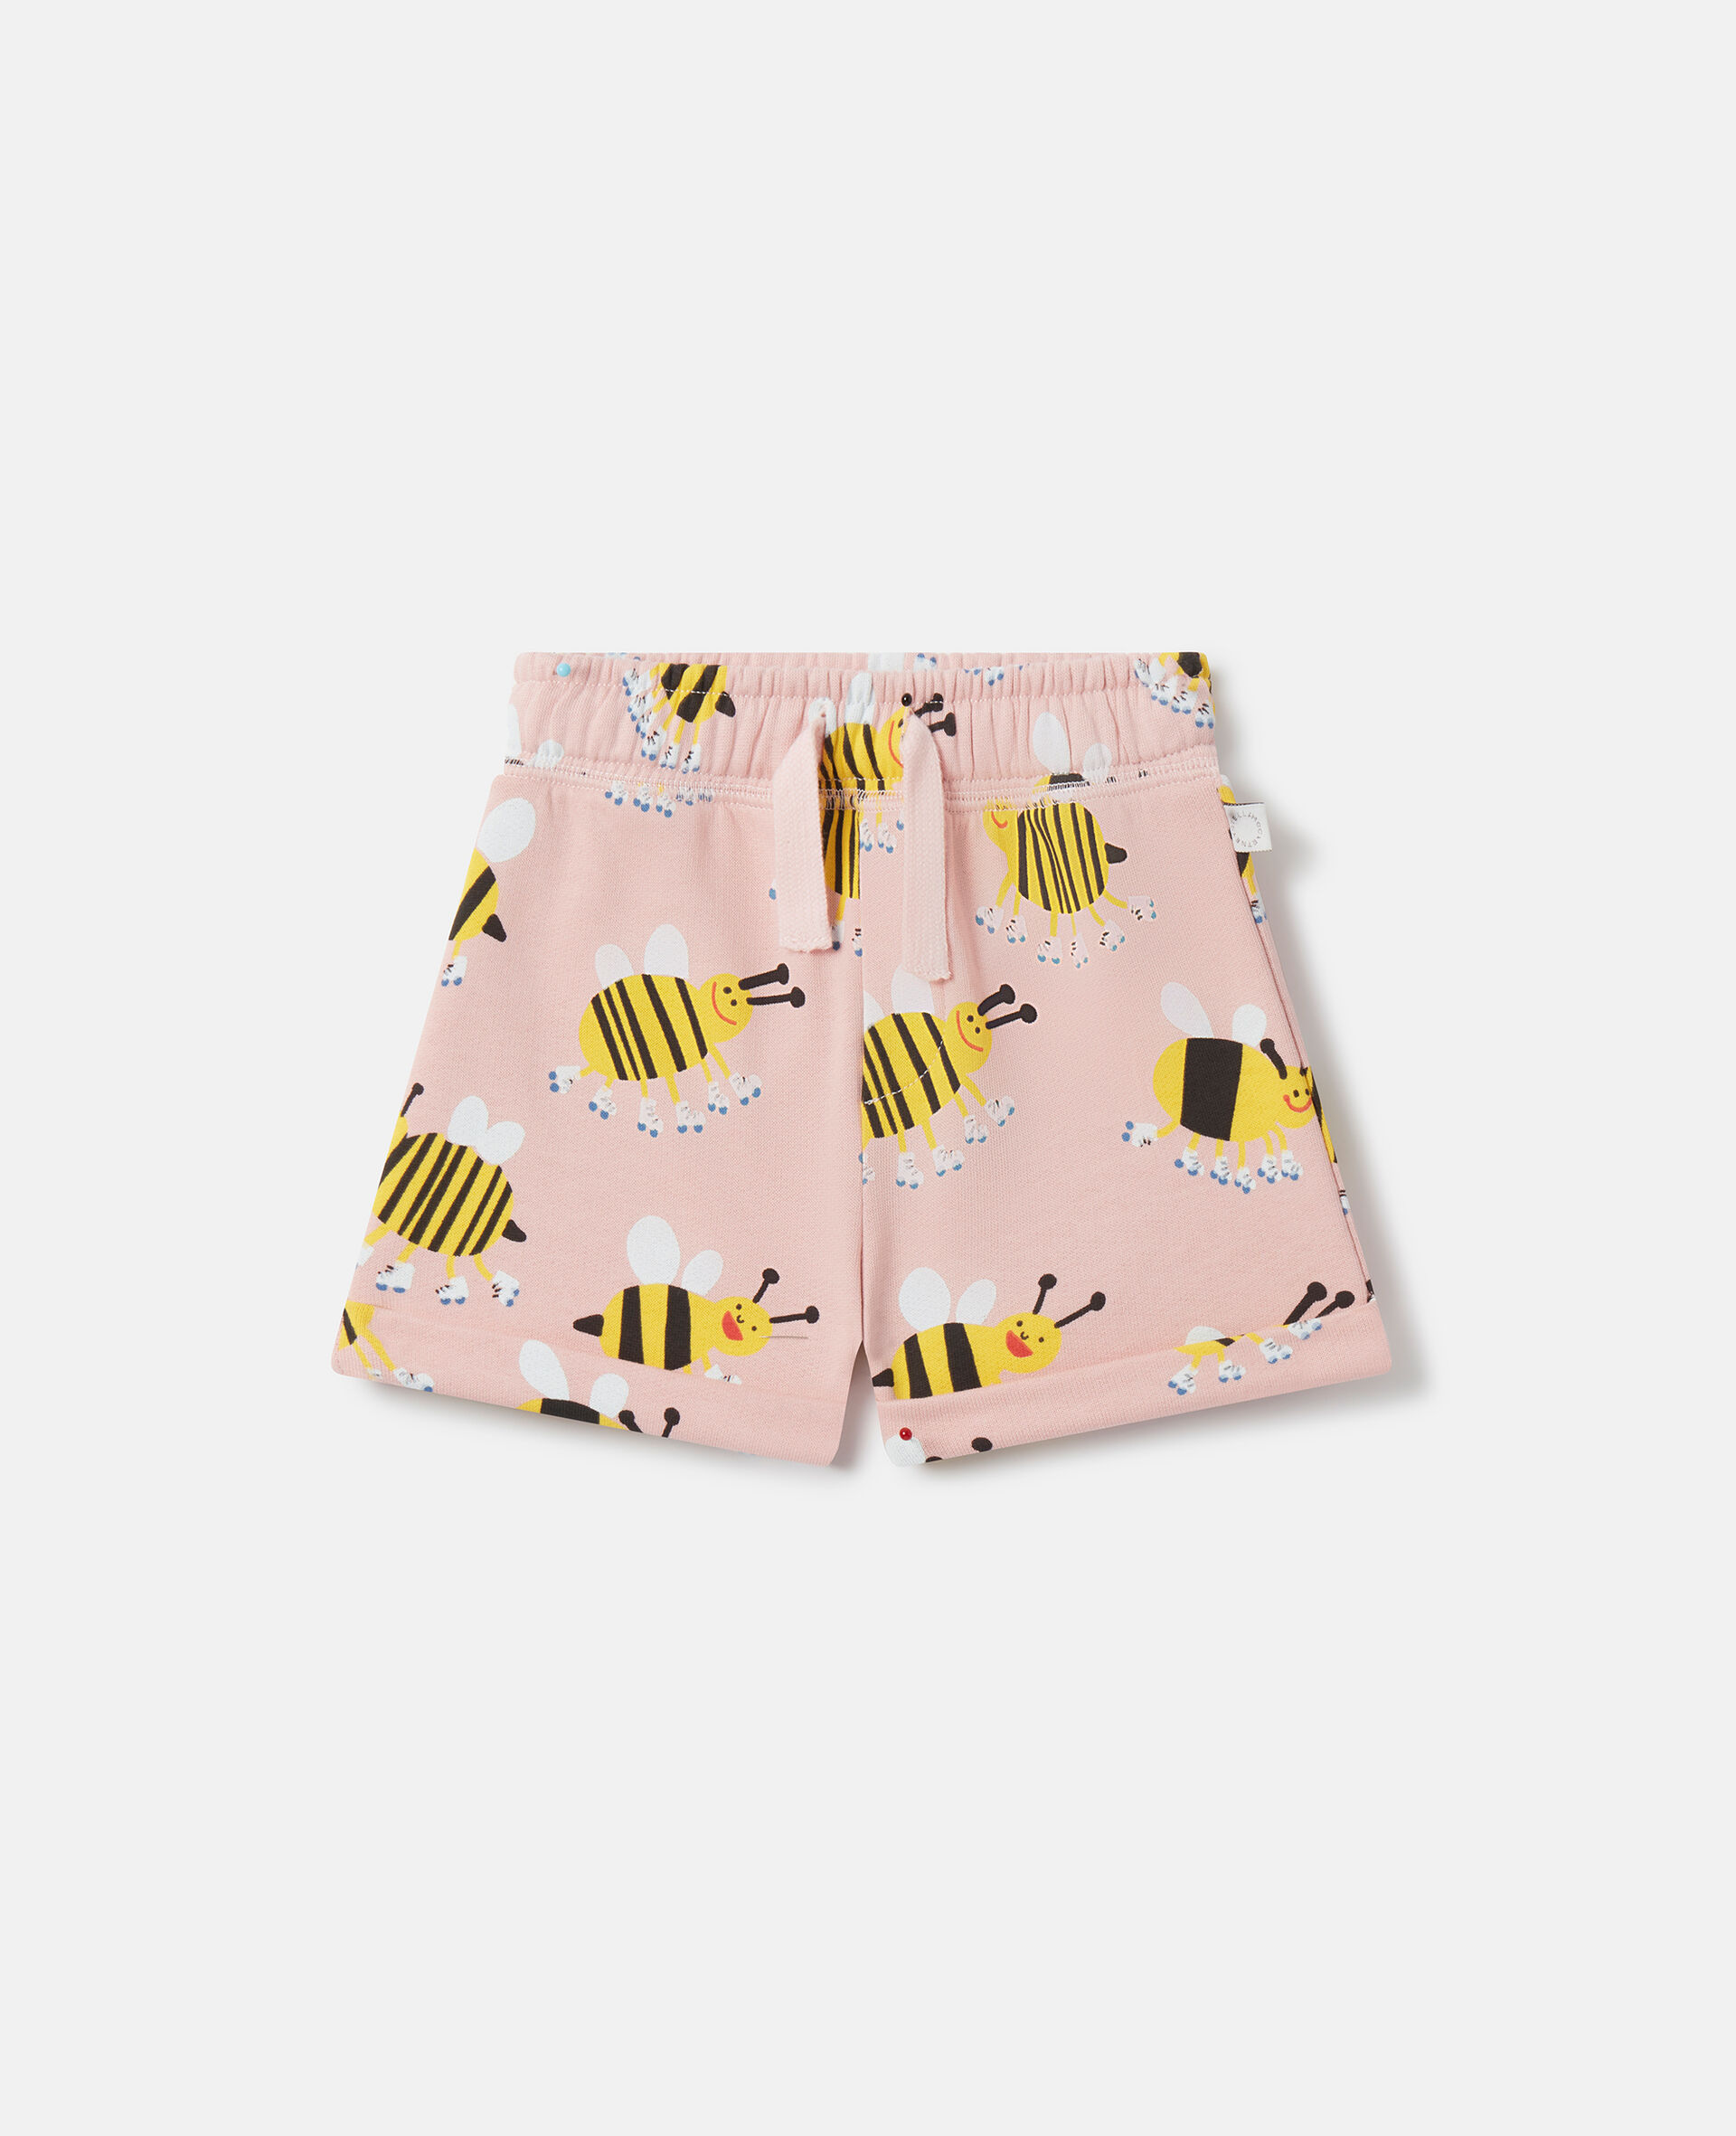 Roller Skate Bumblebee Shorts-Multicolored-large image number 0